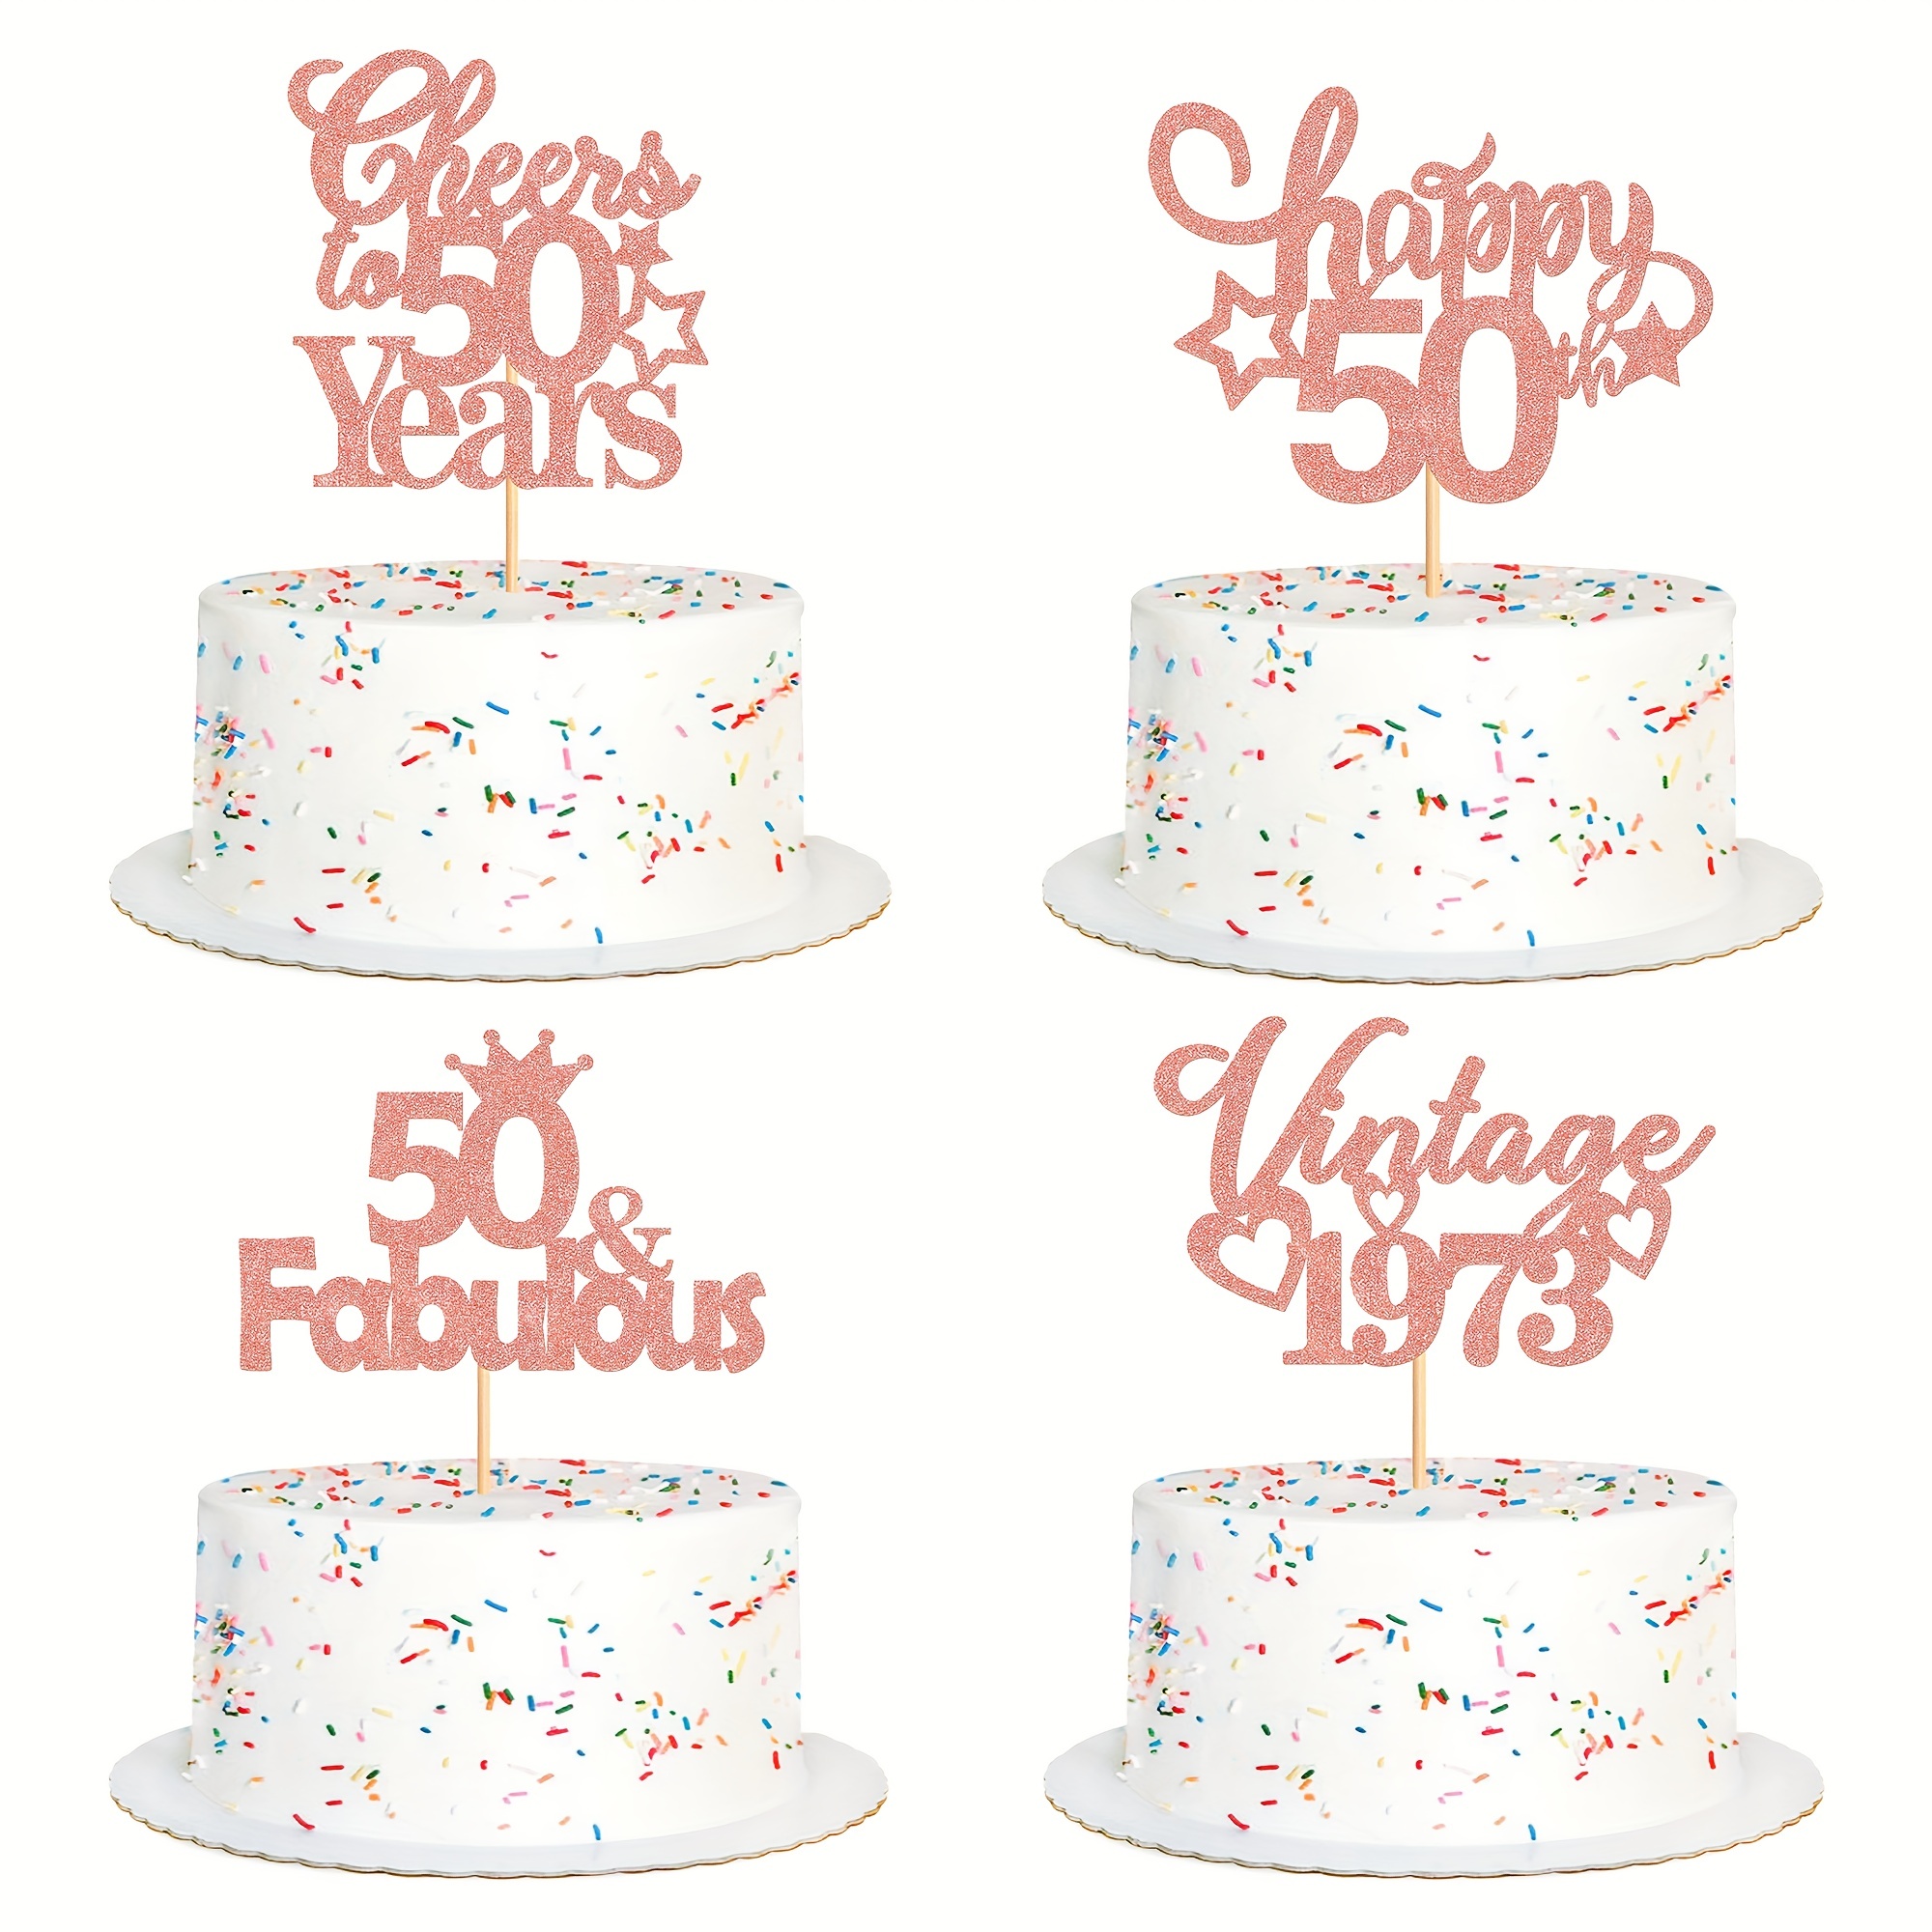 50th Birthday Cake Decorations Set Include 50th Birthday Candles Numeral 50  Cake Candles and Happy 50th Birthday Cake Toppers with Heart Star Cupcake